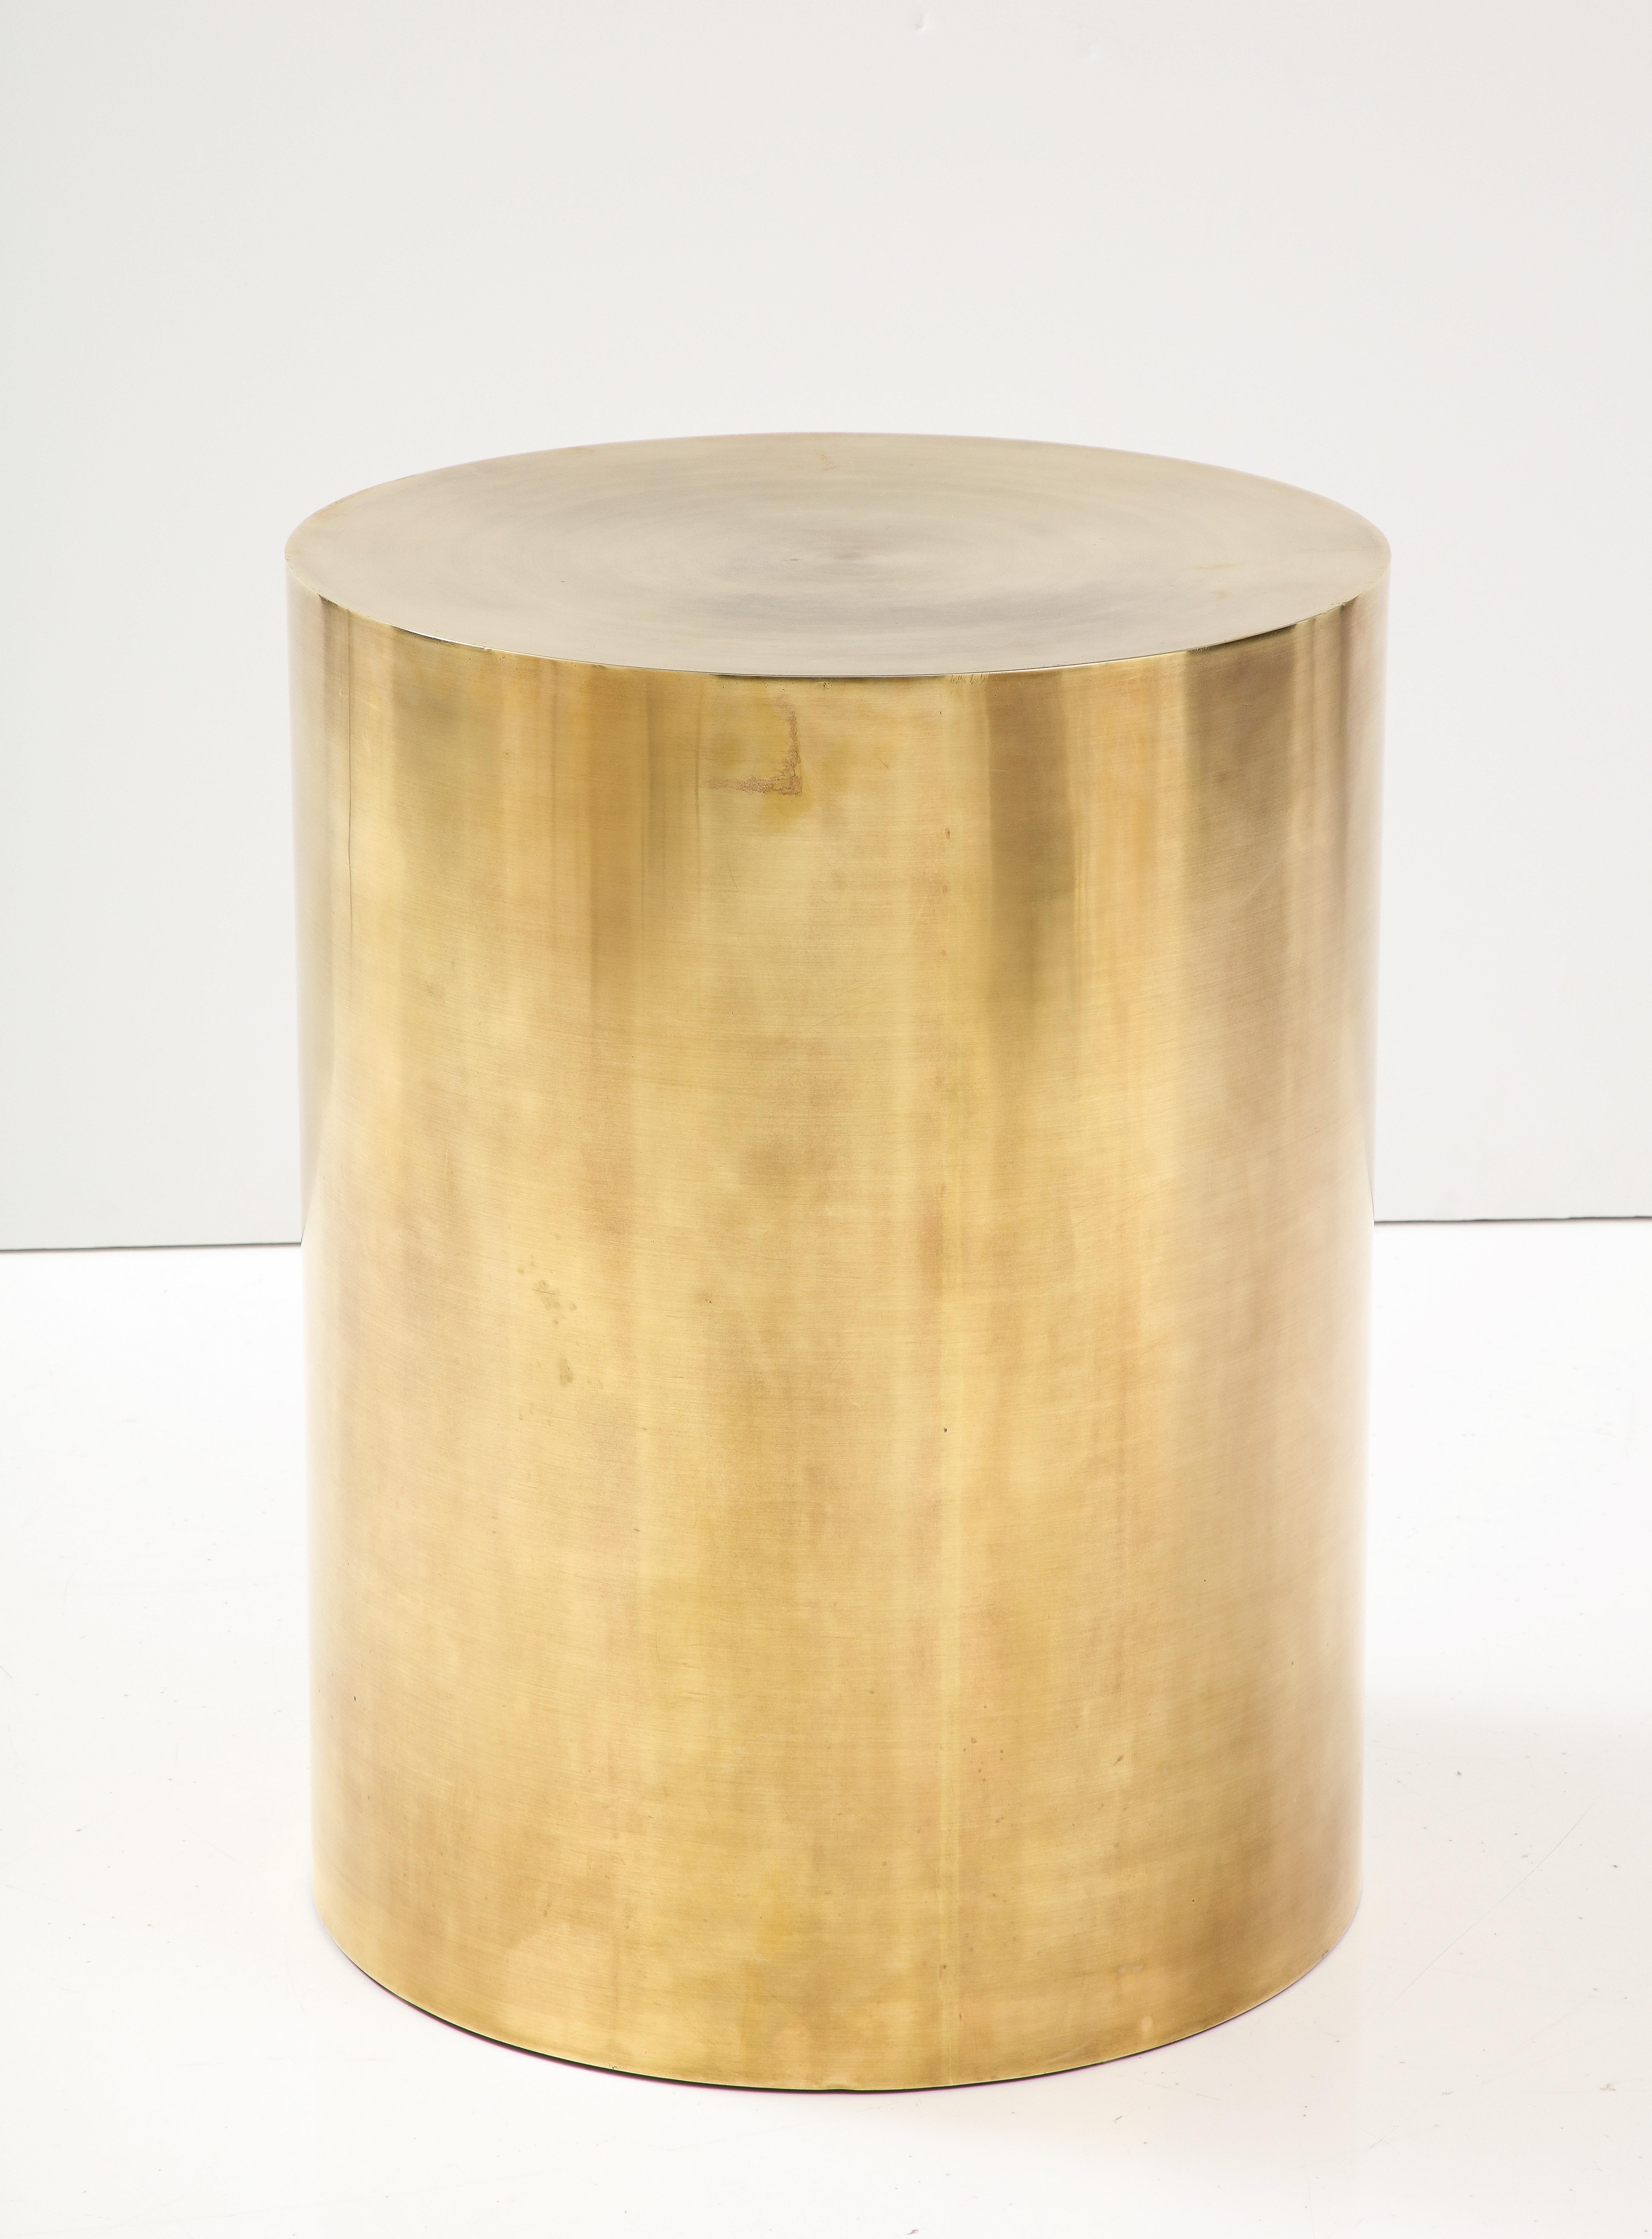 1970's Mid-Century Modern Brass Drum Dining Table Attributed To Brueton For Sale 7